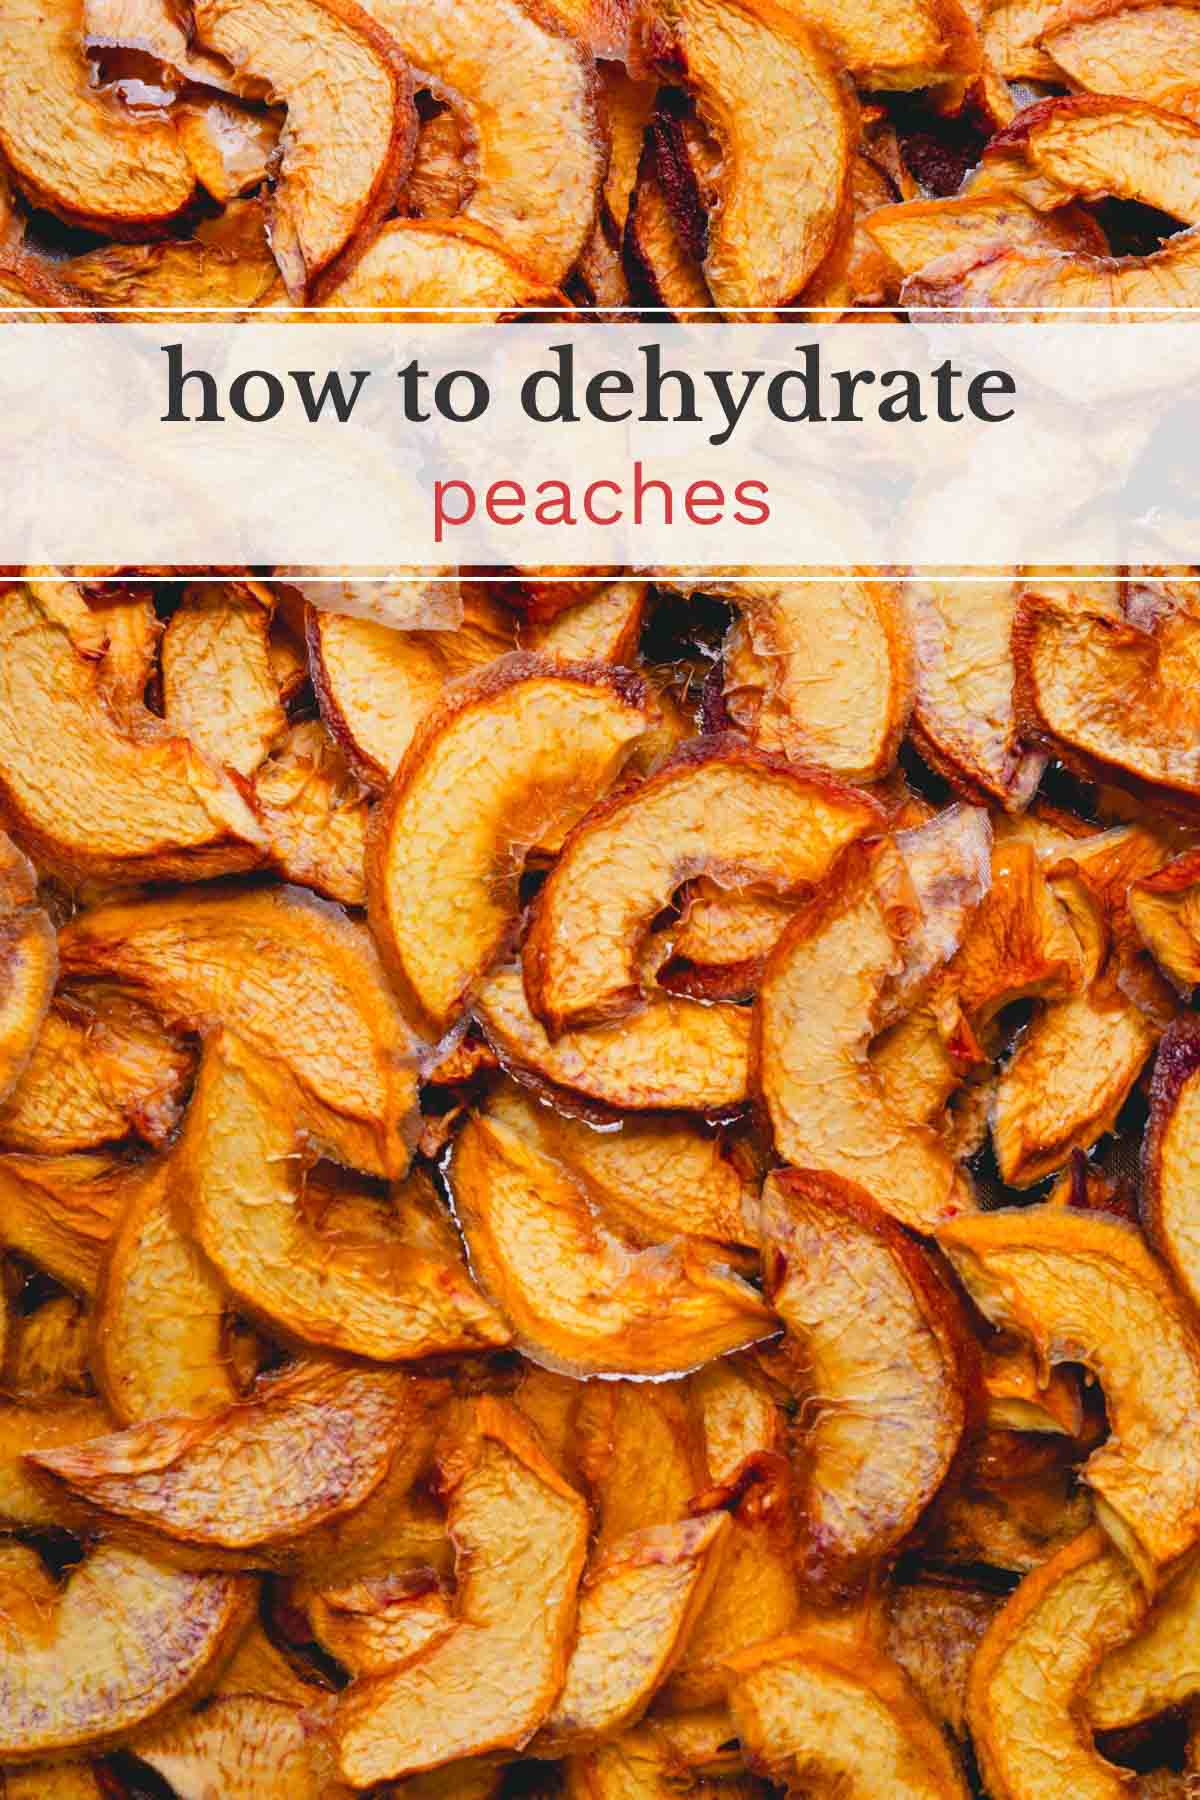 An image of dehydrated peaches with a banner that reads, "how to dehydrate peaches".